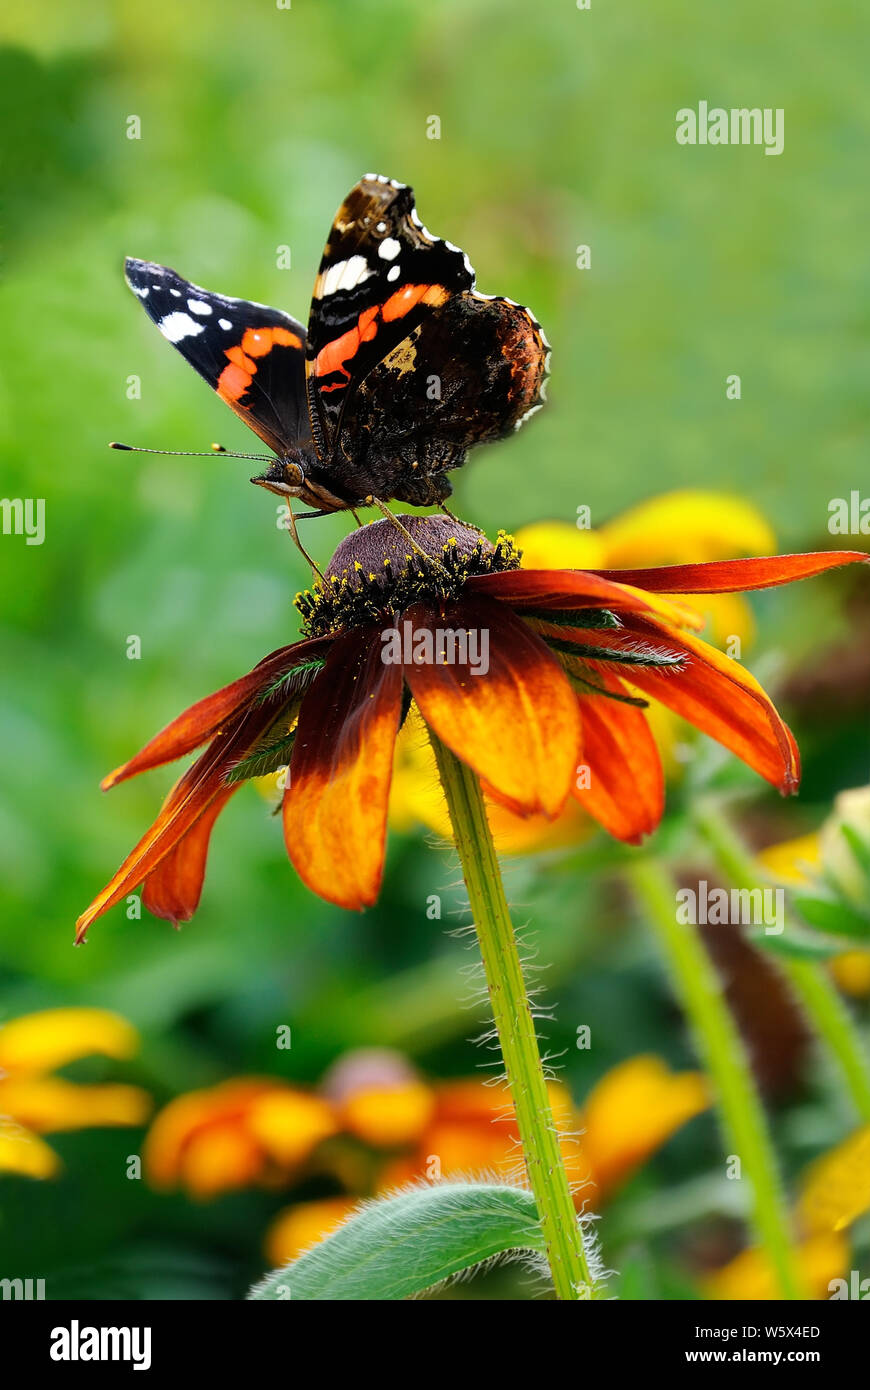 The butterfly on yellow flower of rudbeckia Stock Photo